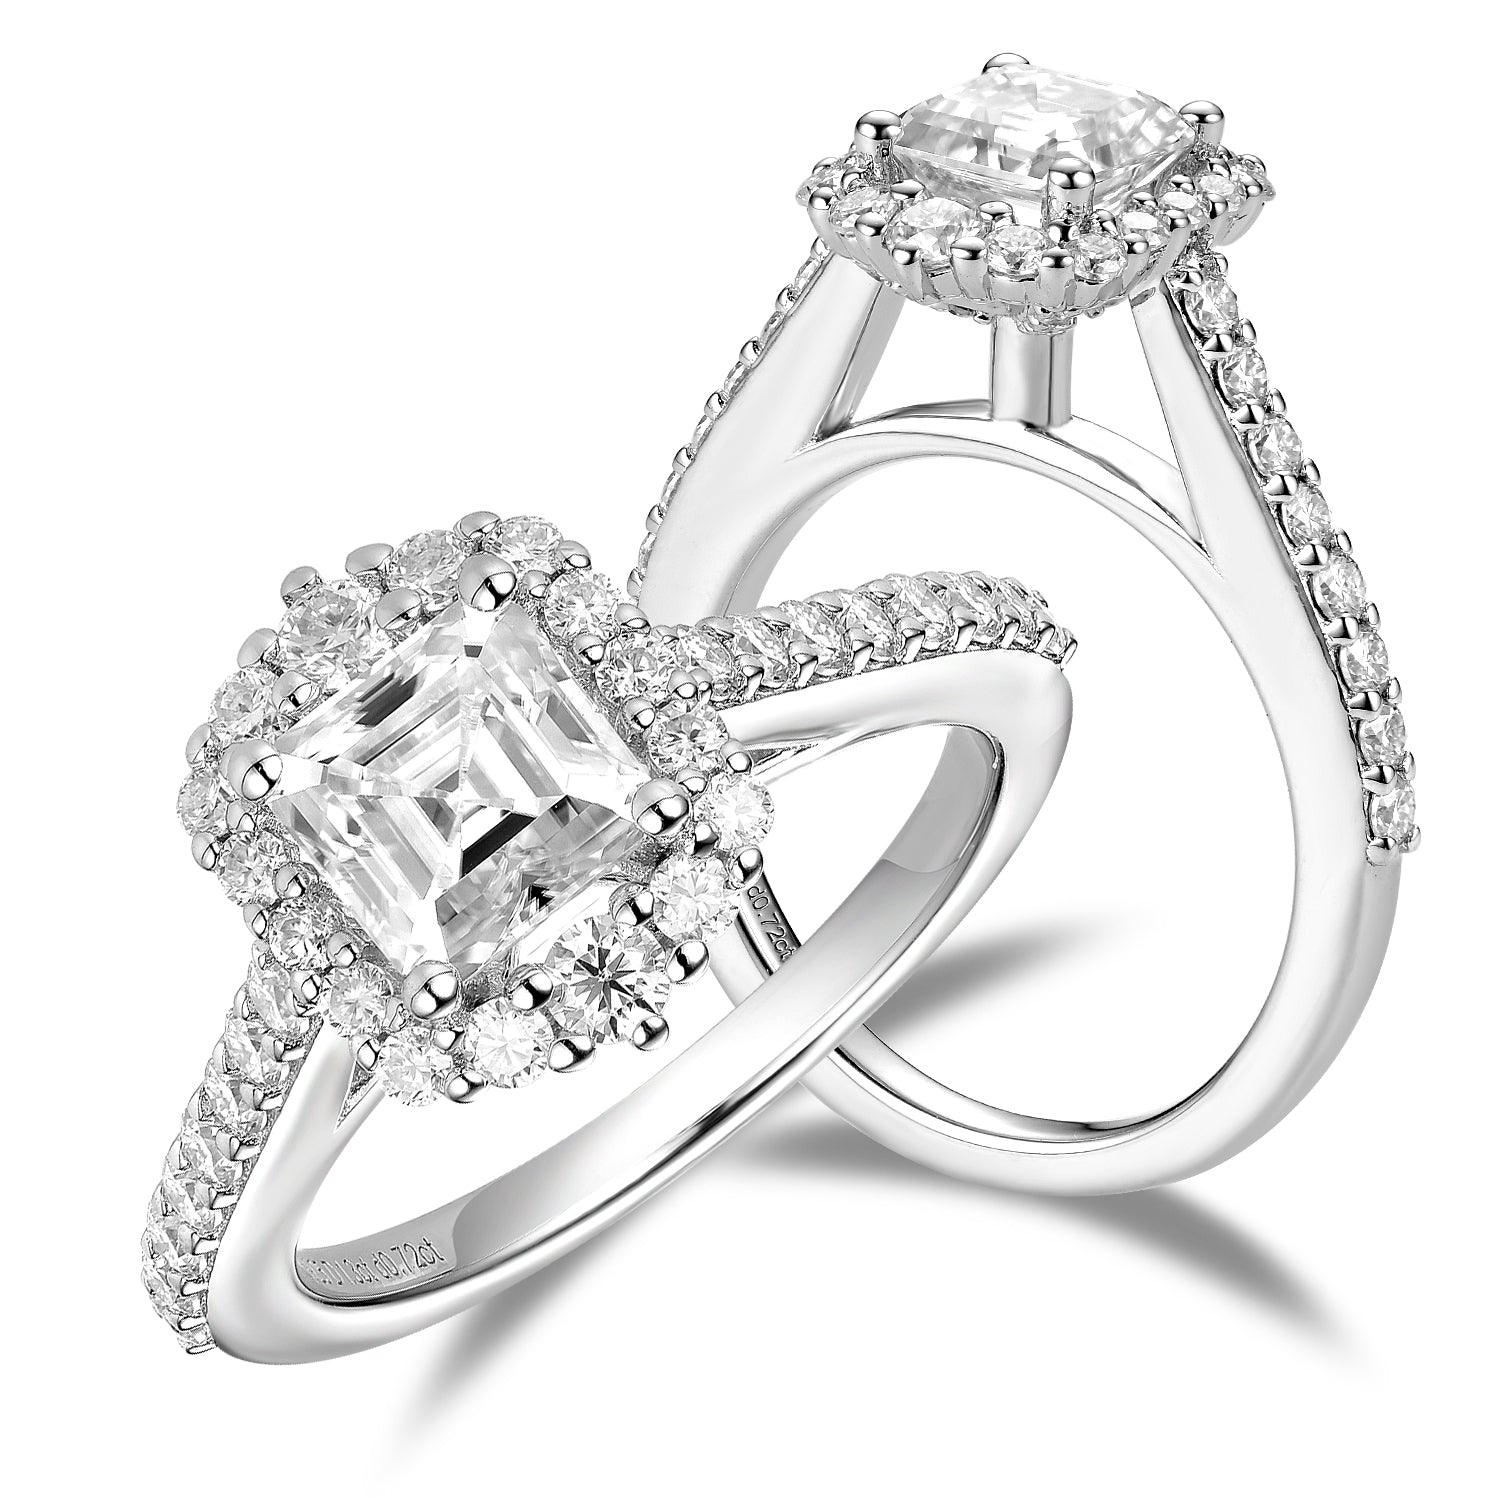 DovEggs sterling silver 1.3 carat halo asscher moissanite engagement ring